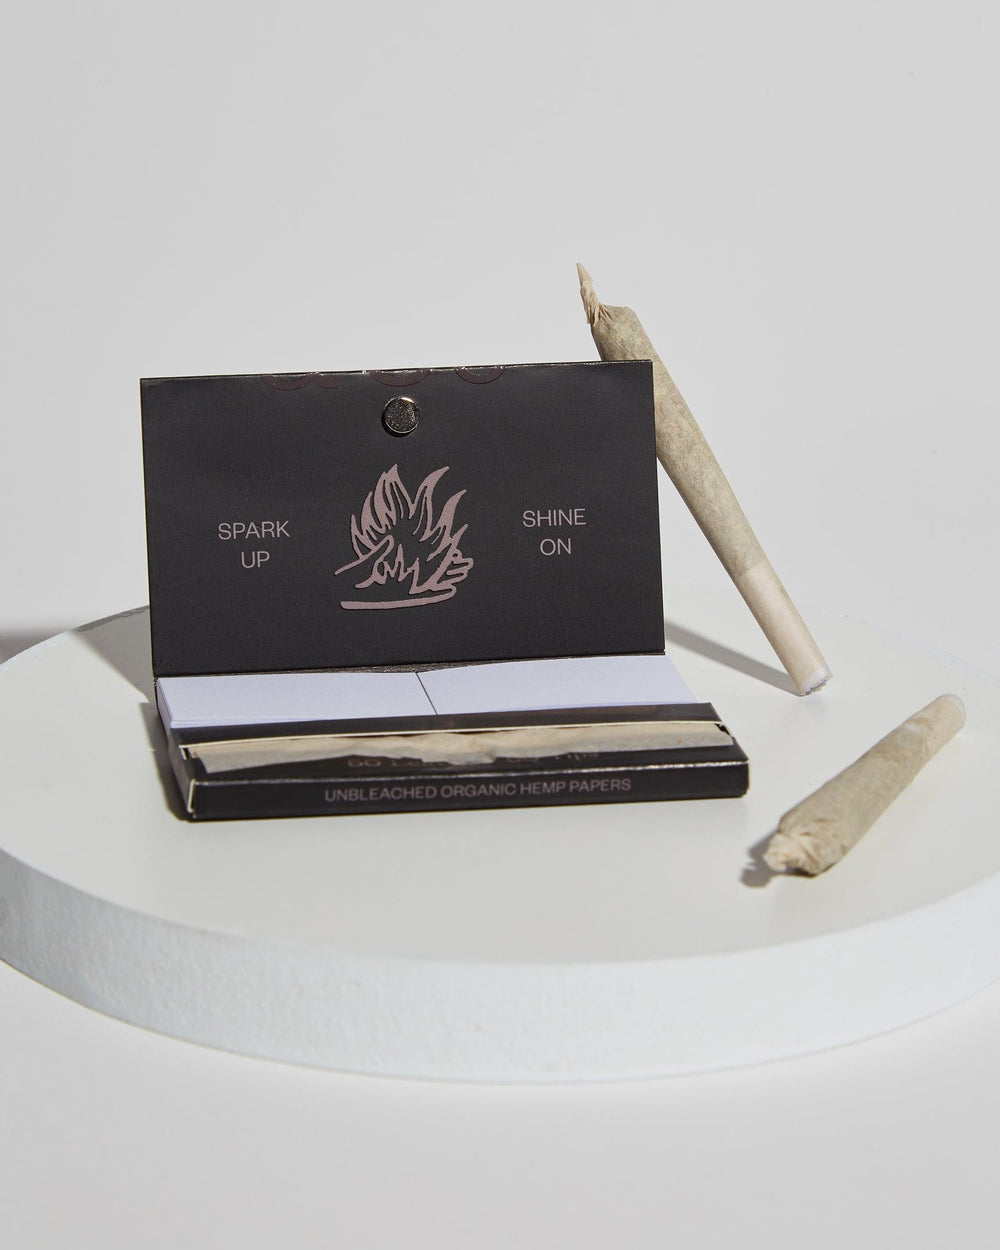 sackville black spark up rolling papers with joints and filters